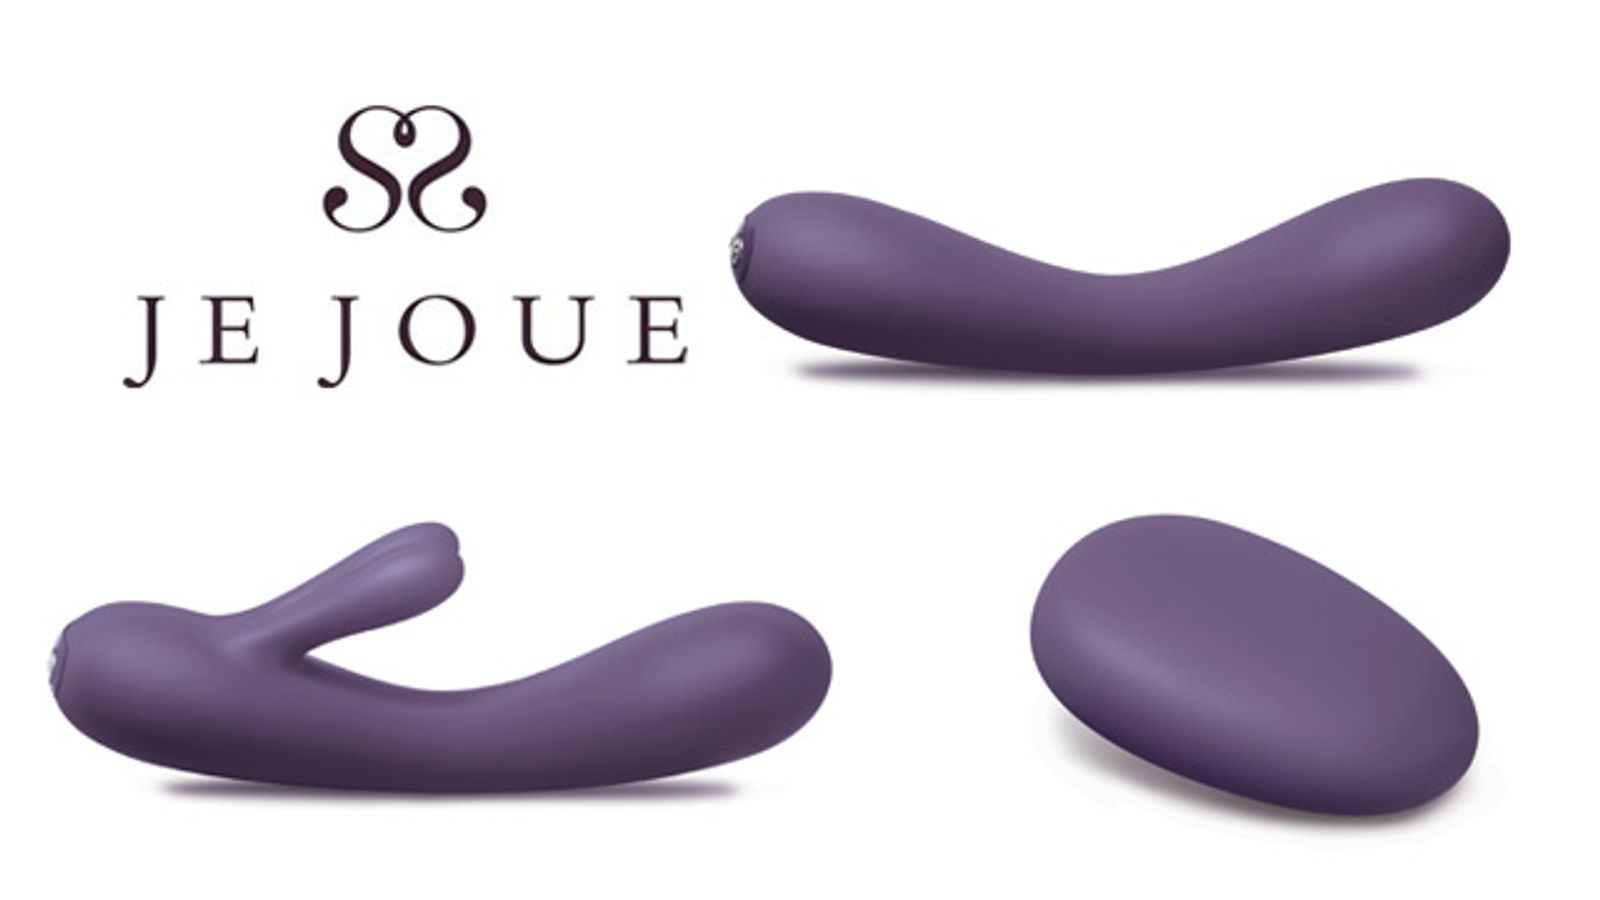 Je Joue Debuts 3 Eagerly Awaited Toy Designs